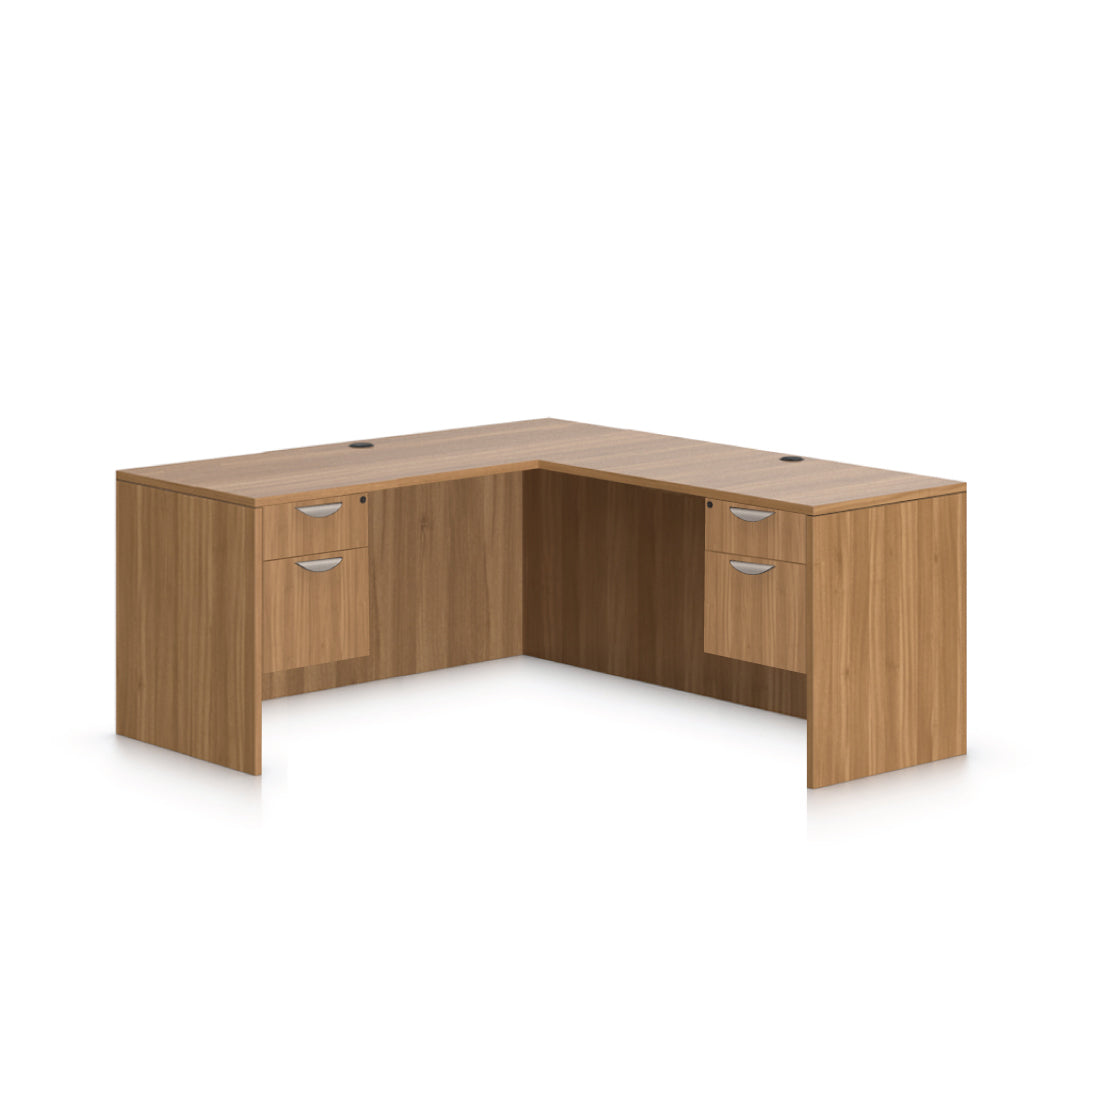 L66B - 5.5' x 5' L-Shape Workstation(Credenza Shell with Two Hanging B/F Pedestal) - Kainosbuy.com